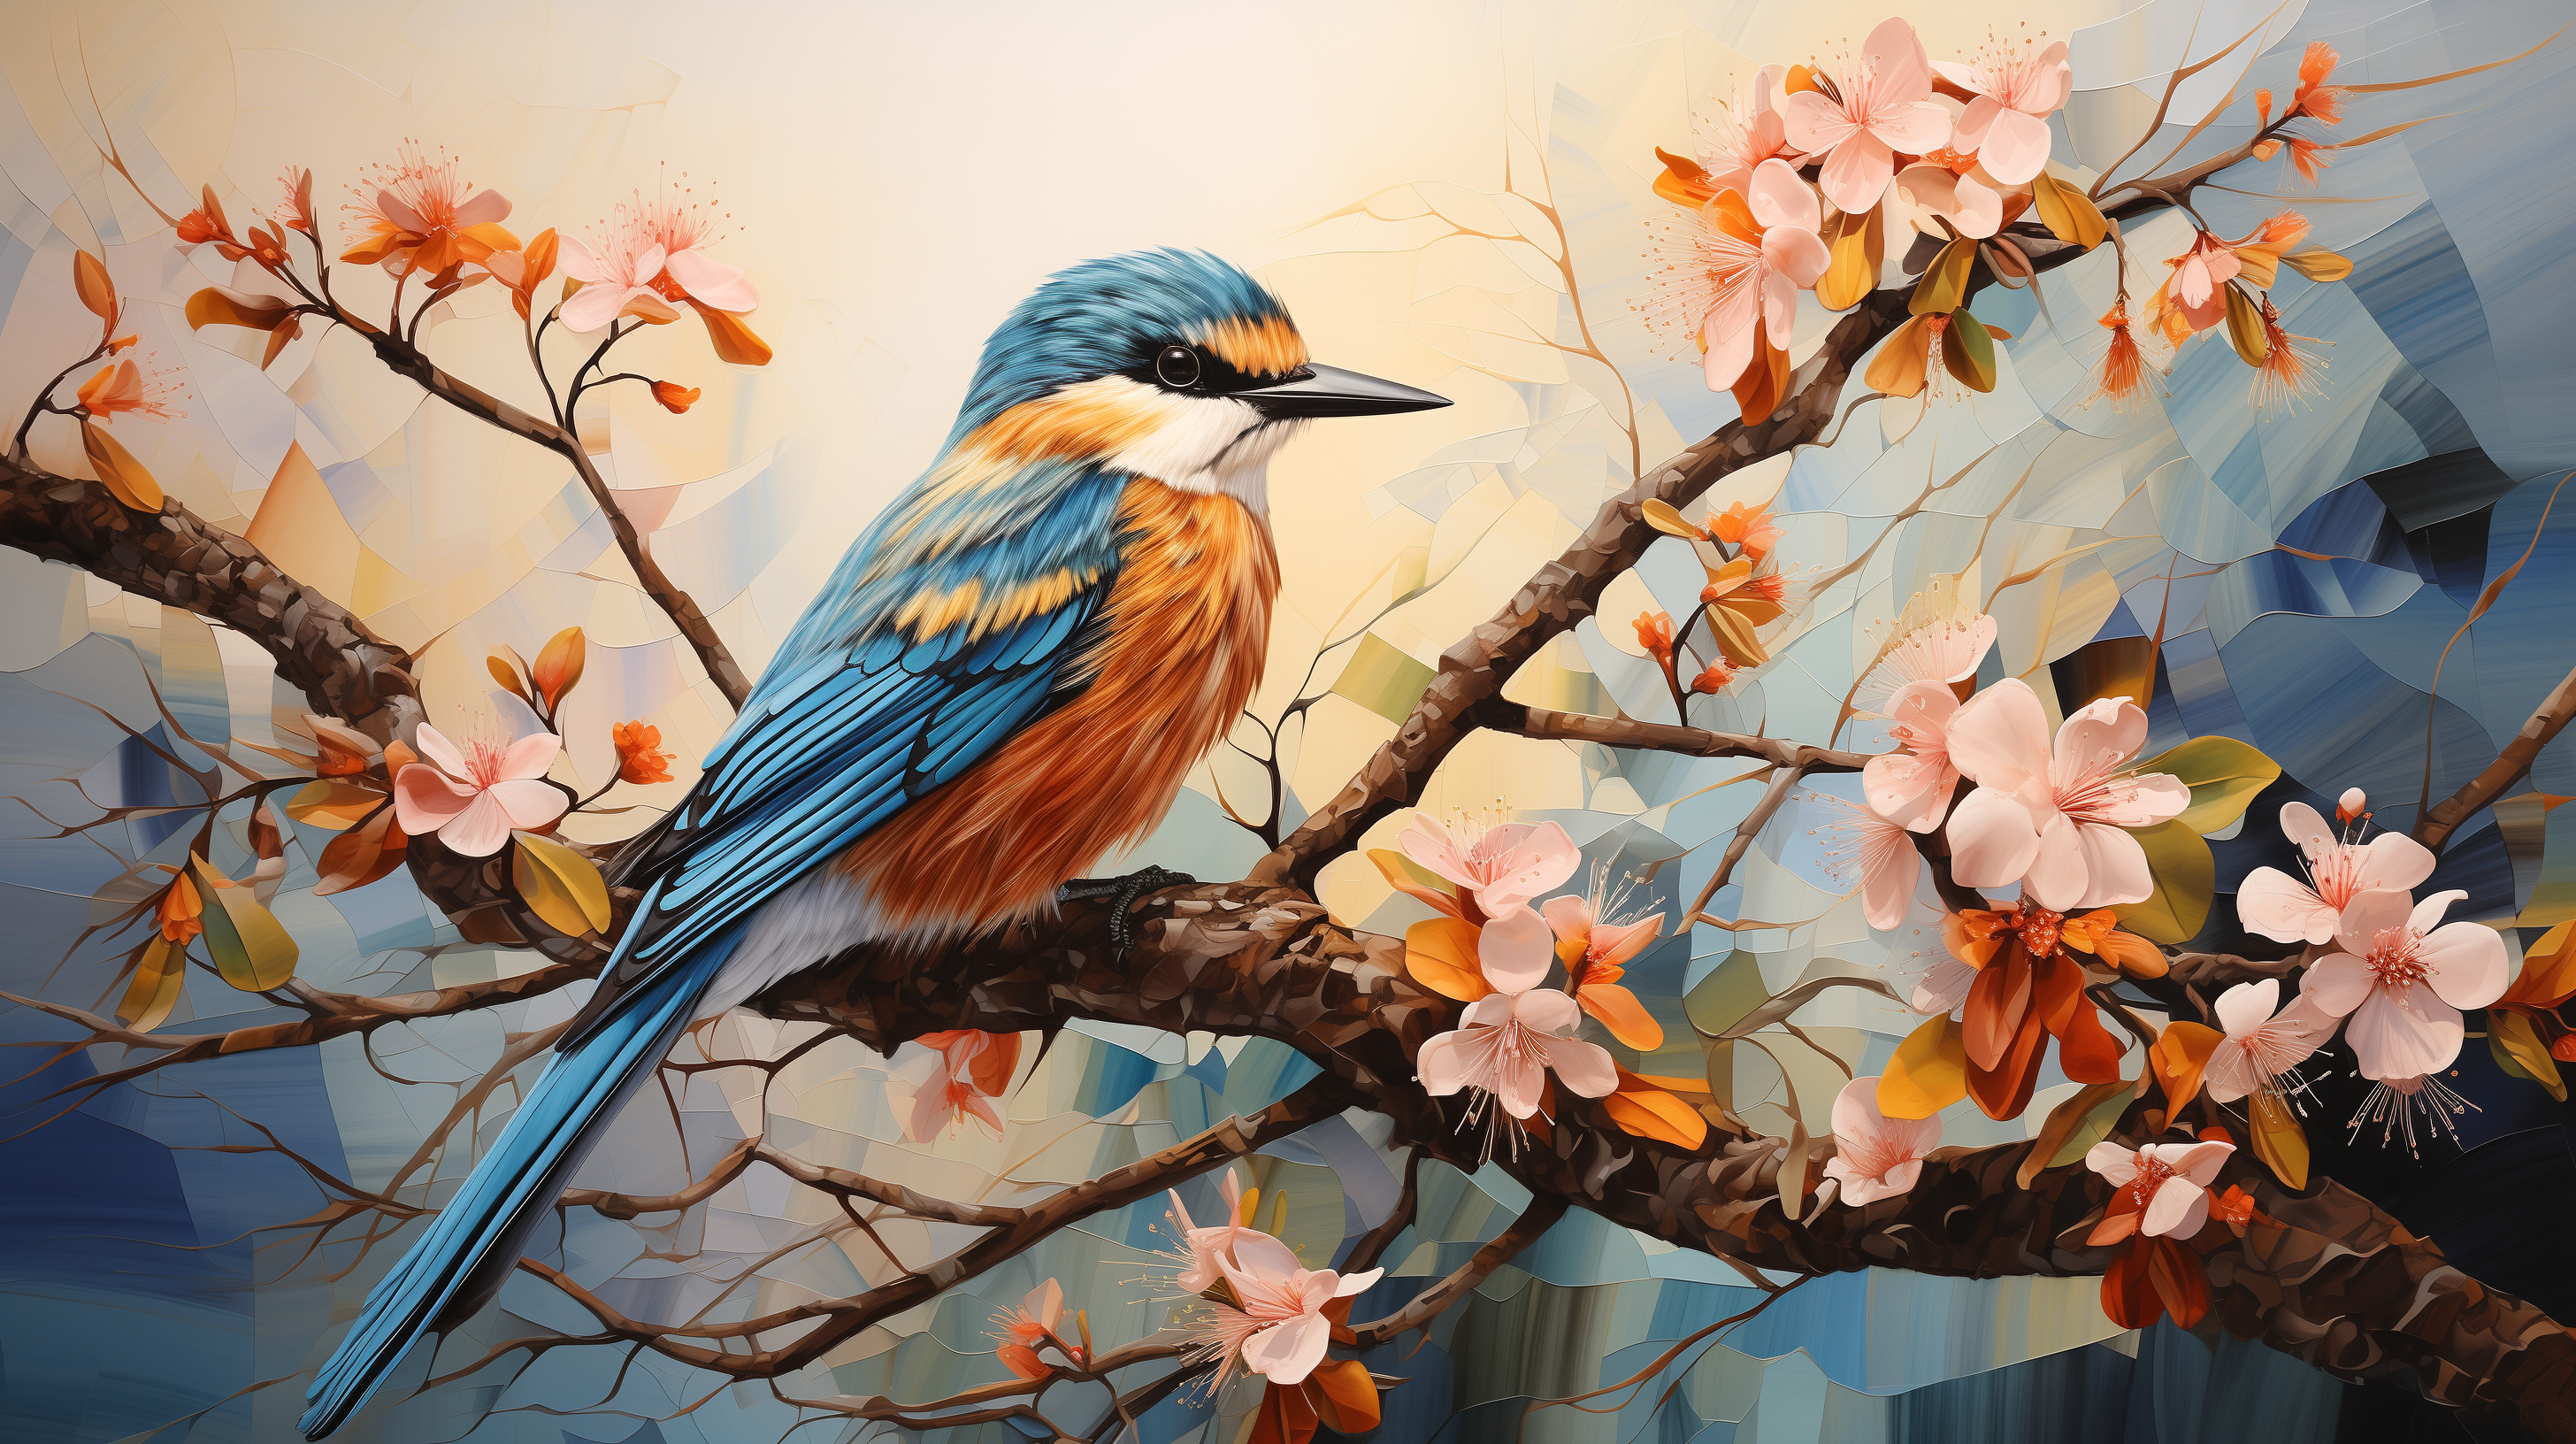 HD desktop wallpaper featuring a vibrant kingfisher perched on a blossoming branch, ideal for a nature-inspired background.